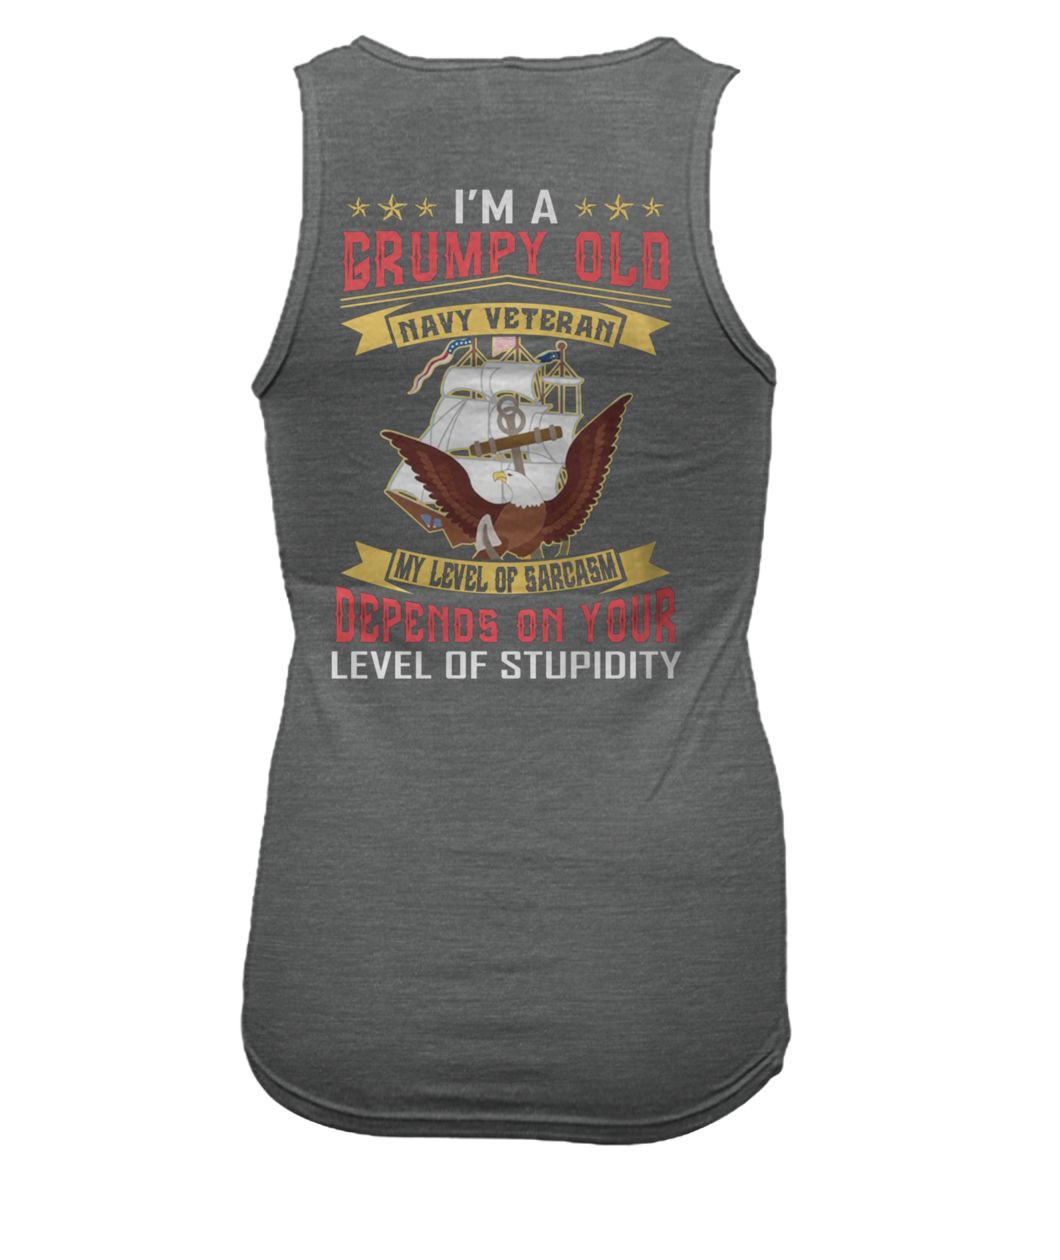 I'm a grumpy old navy veteran my level of sarcasm depends on your level of stupidity women's tank top